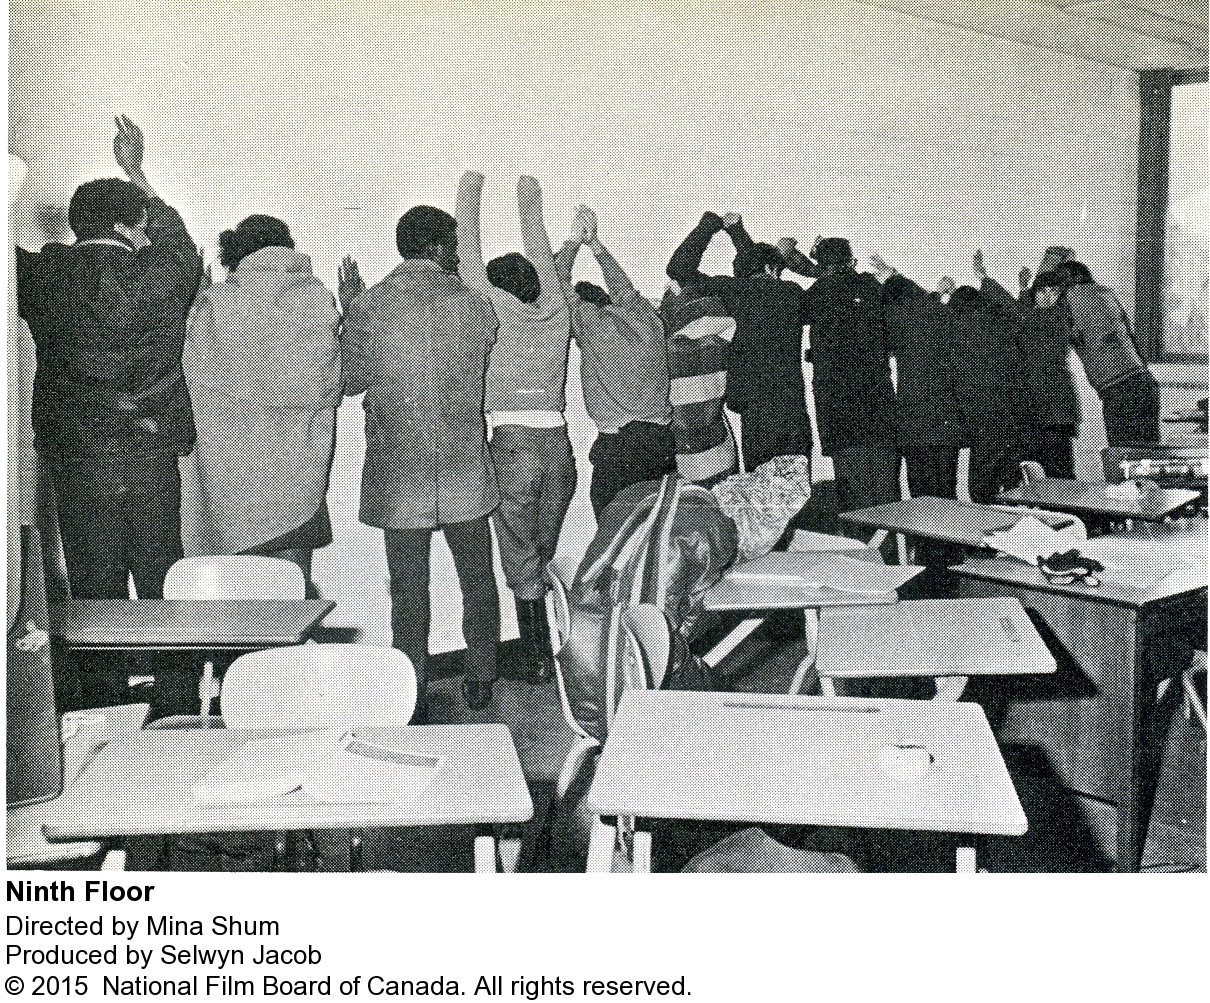 students-with-arms-on-wall.jpg